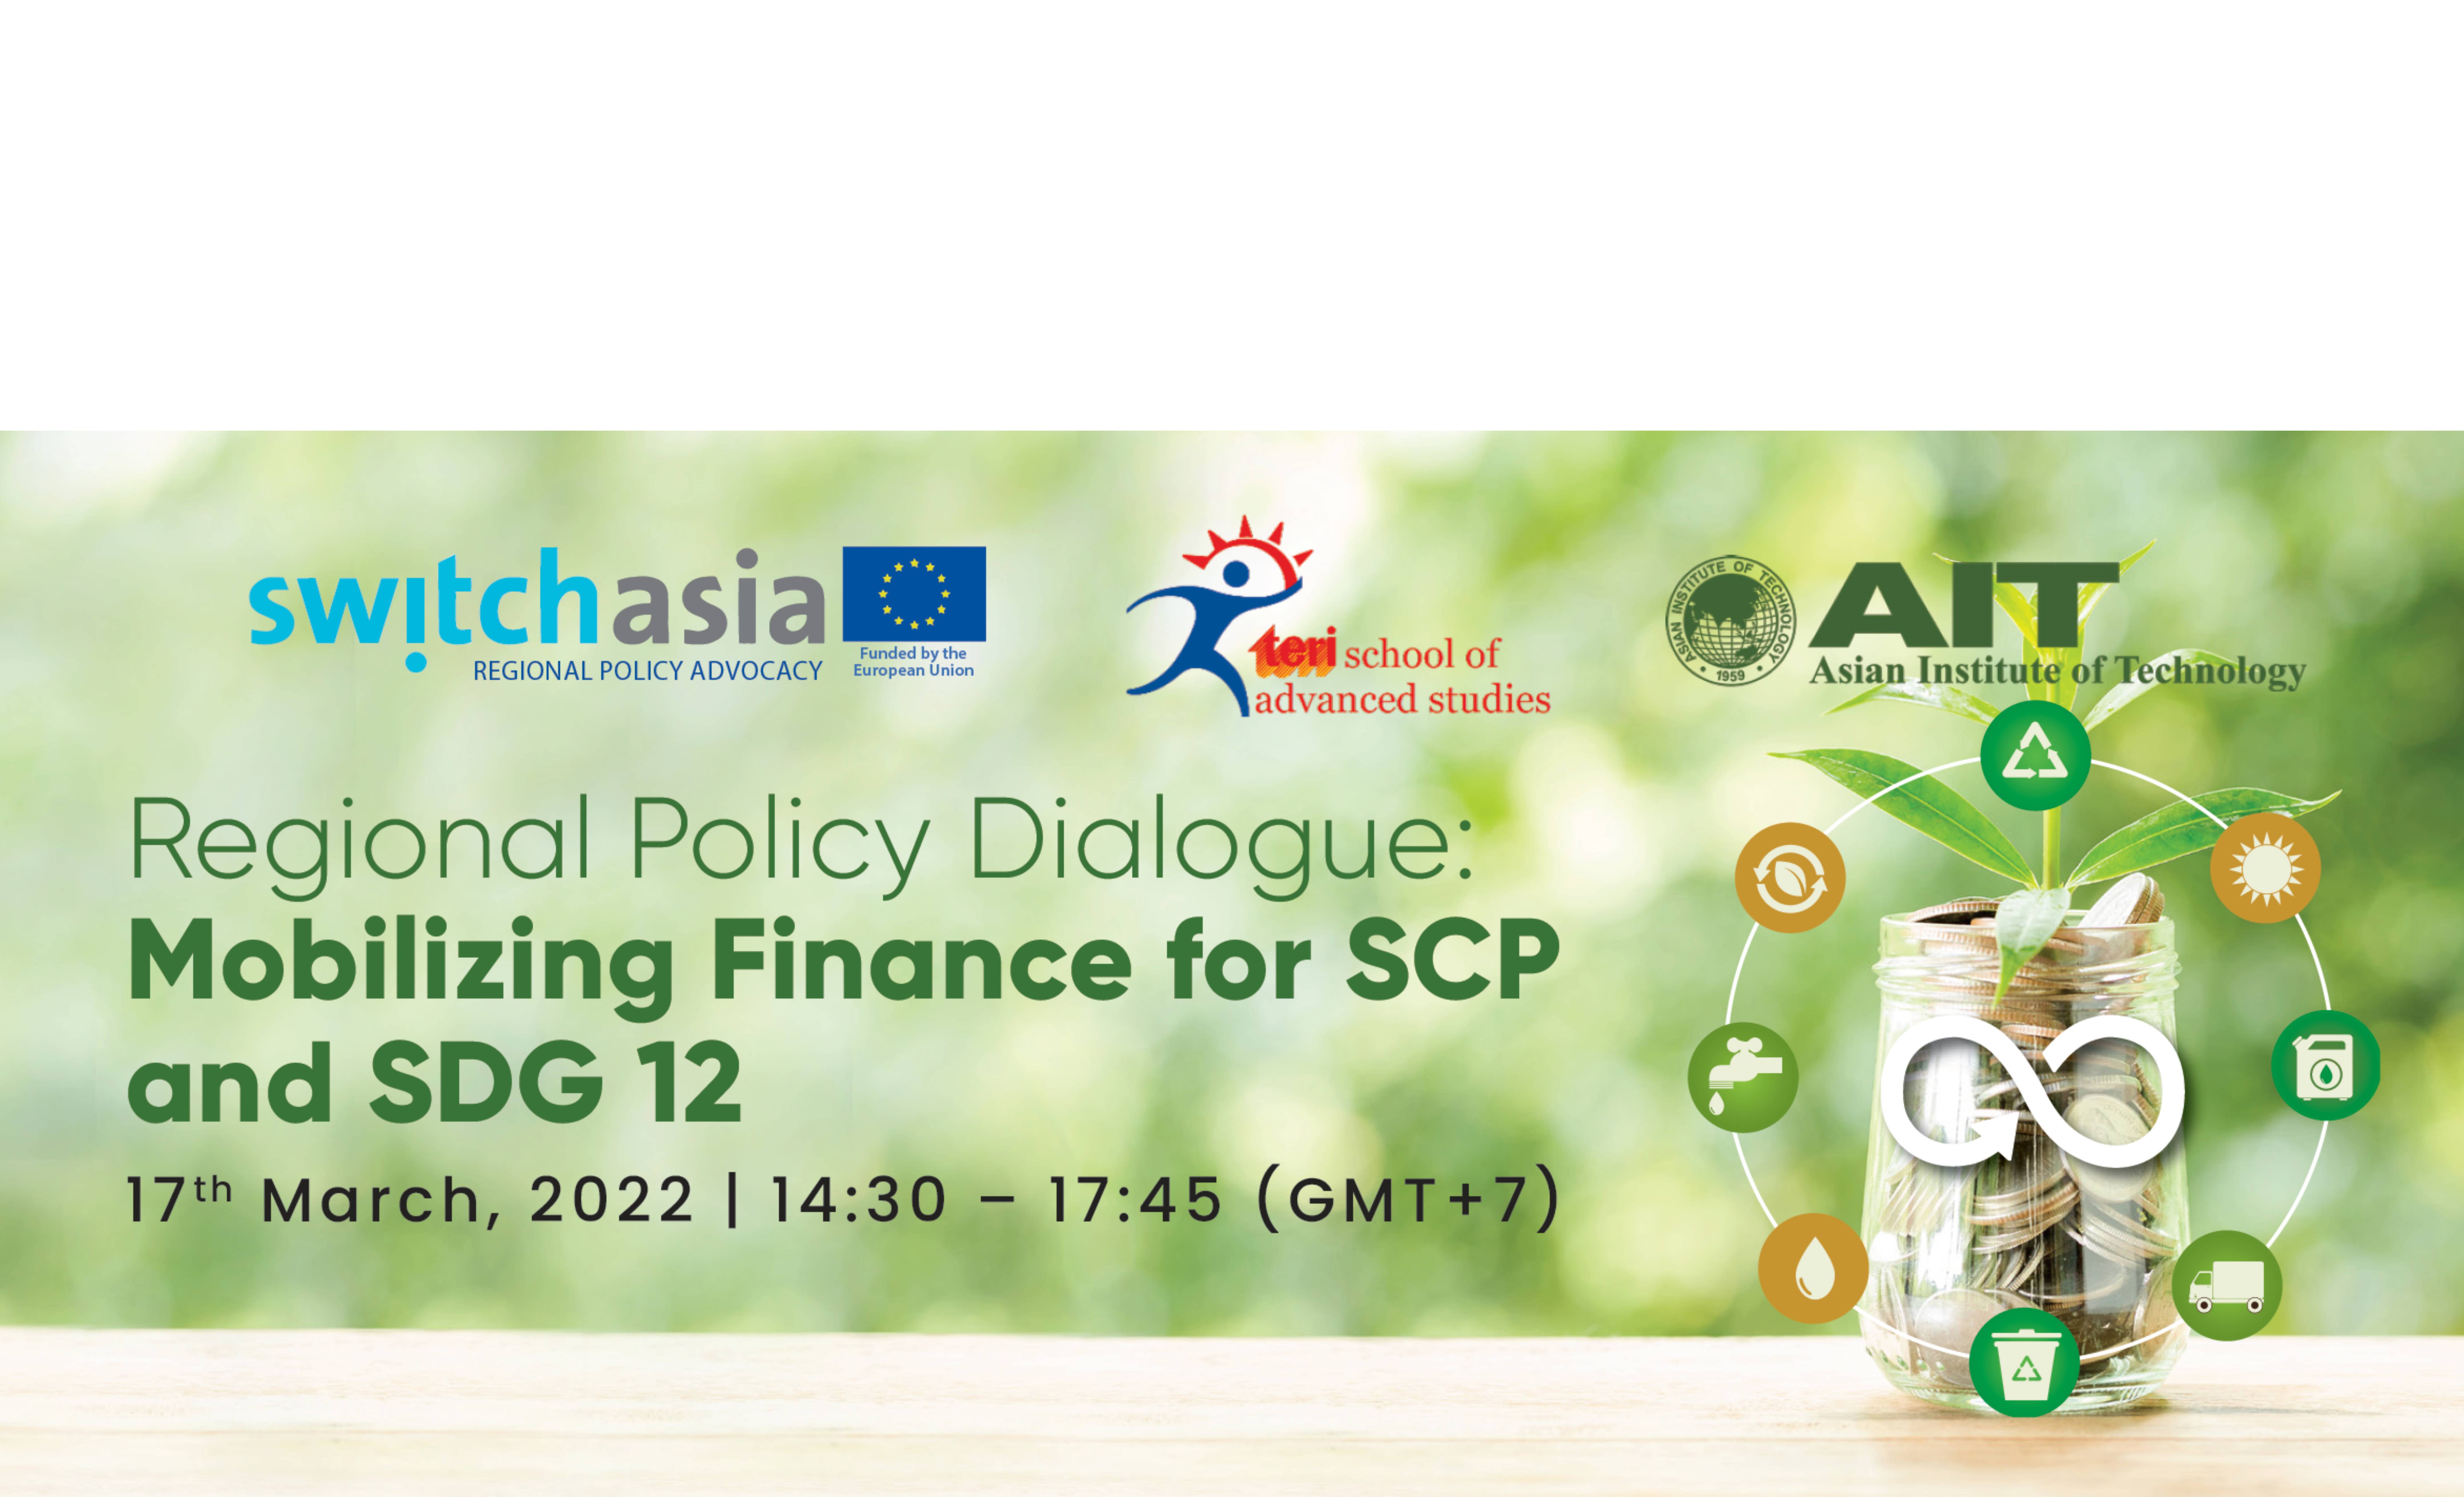 Mobilising Finance for SCP and SDG 12